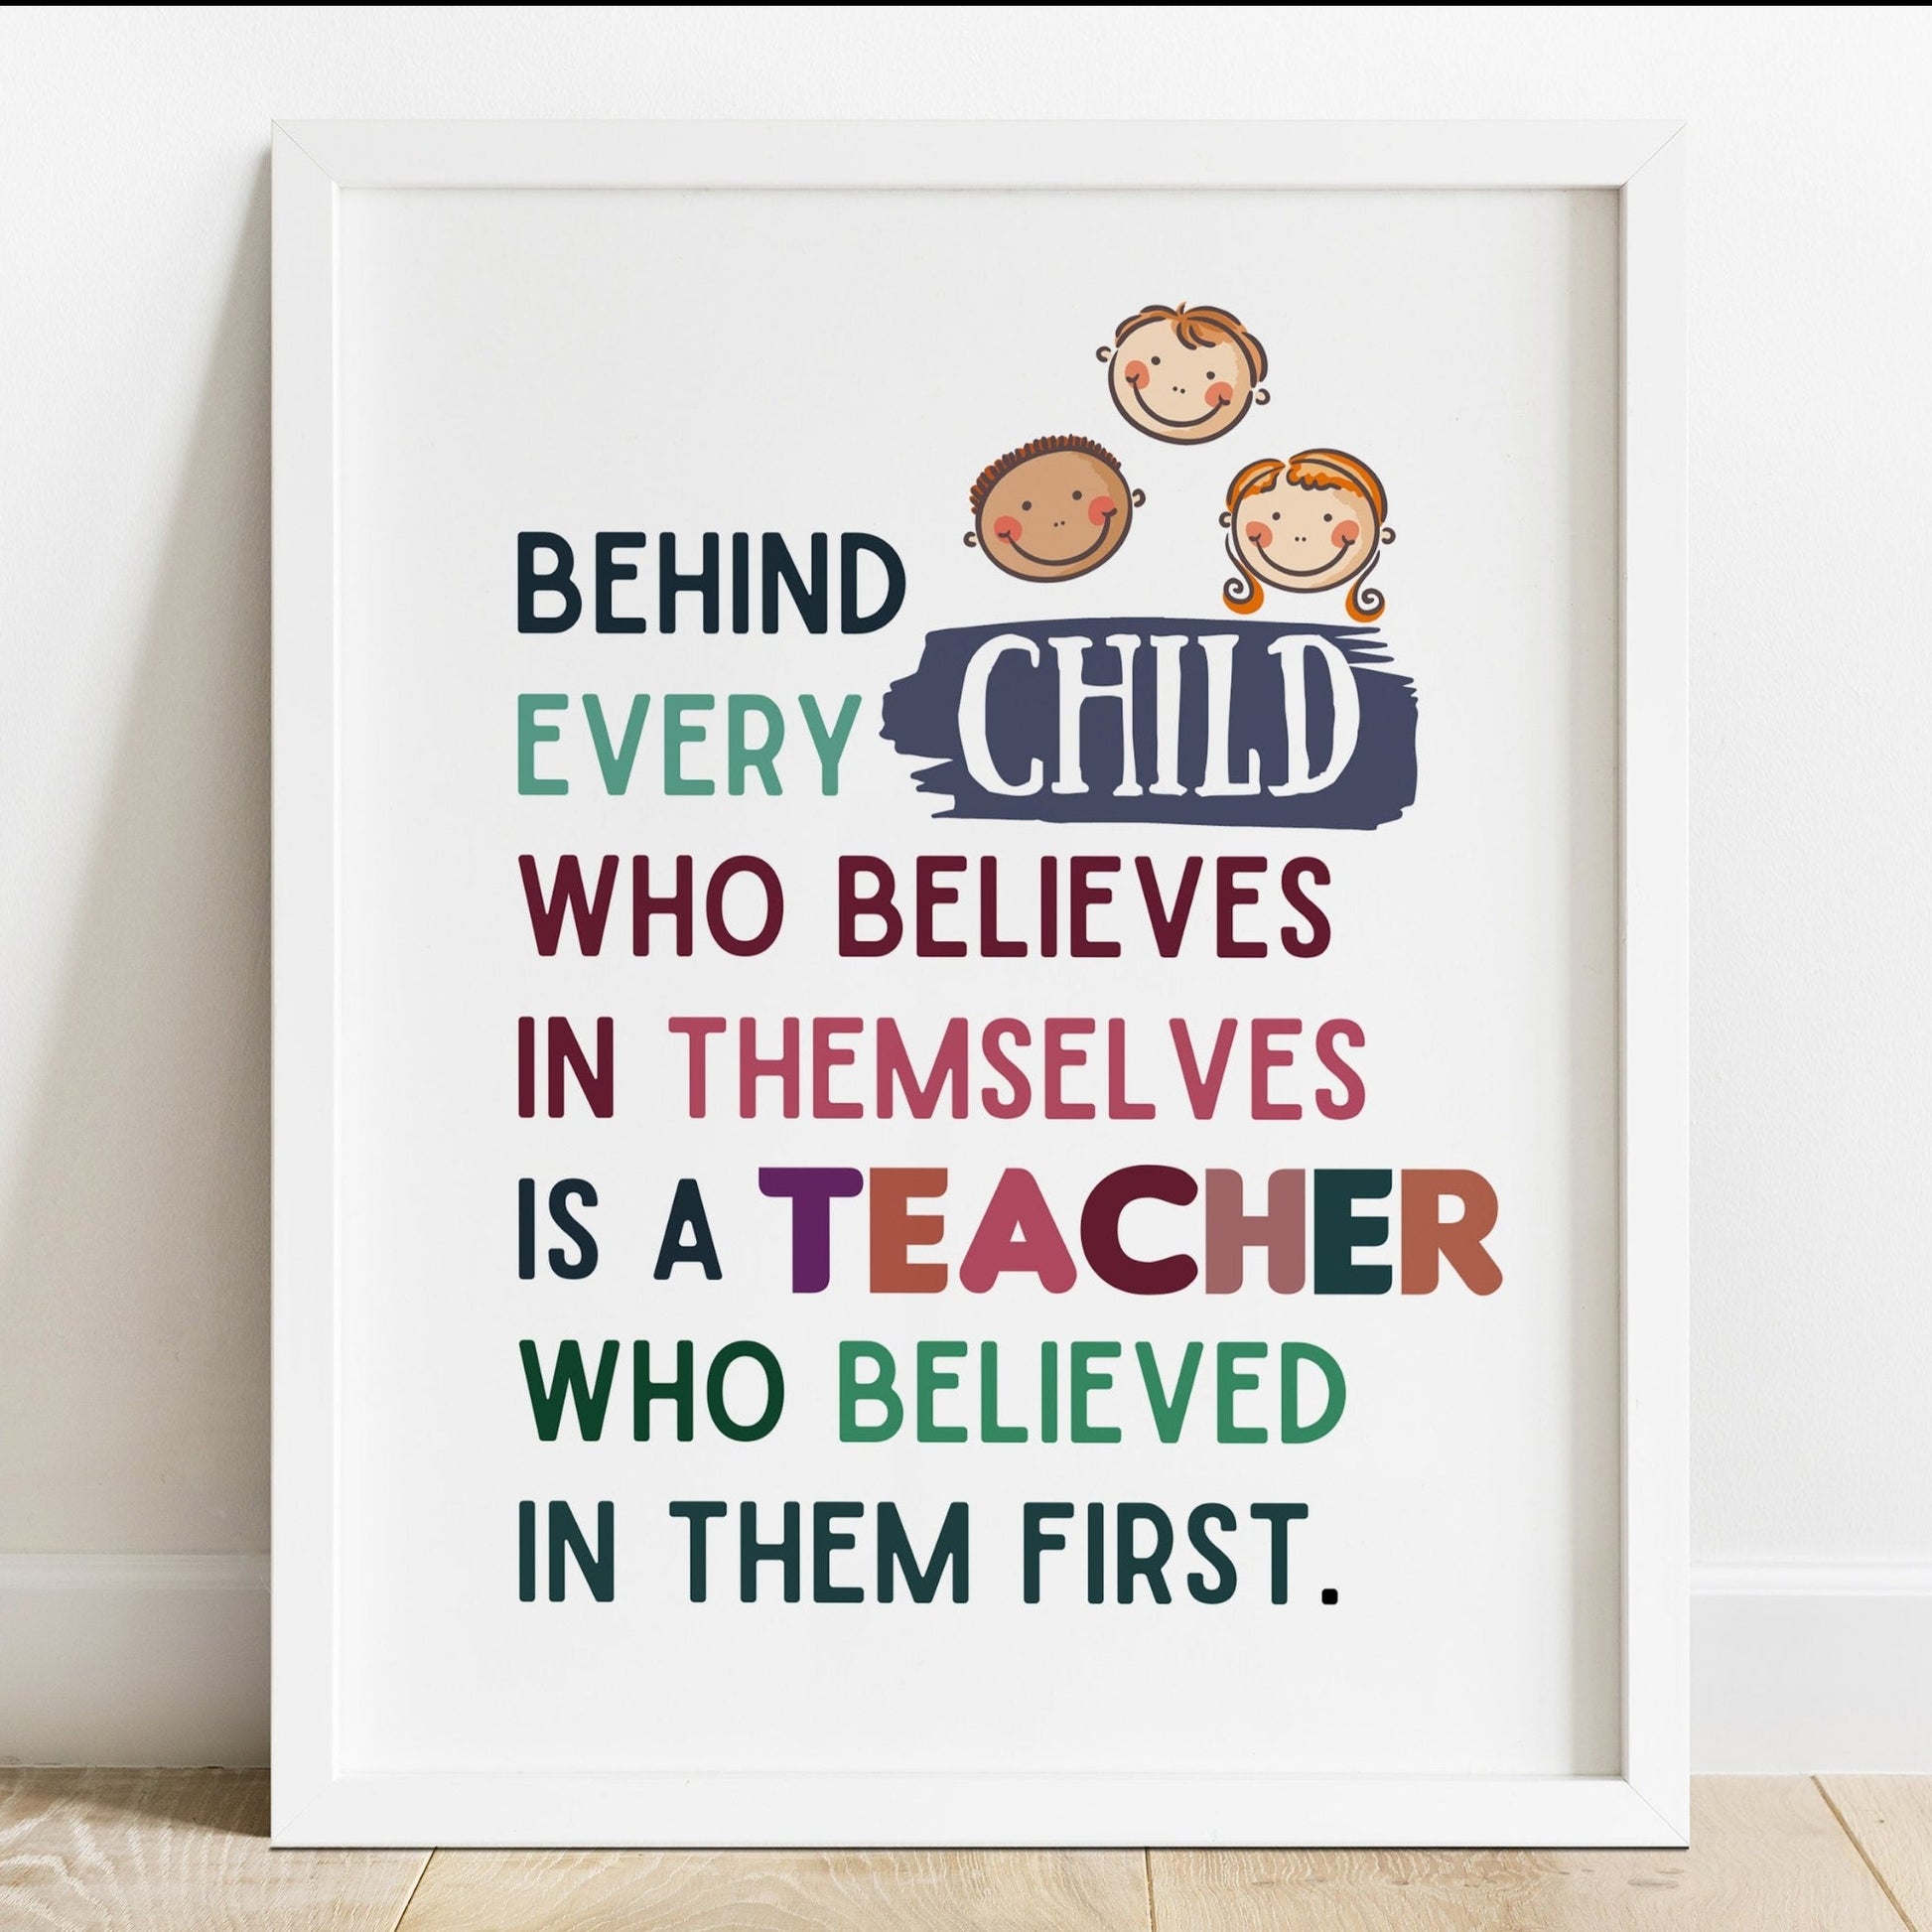 behind every child who believes in themselves is a teacher who believes in them first